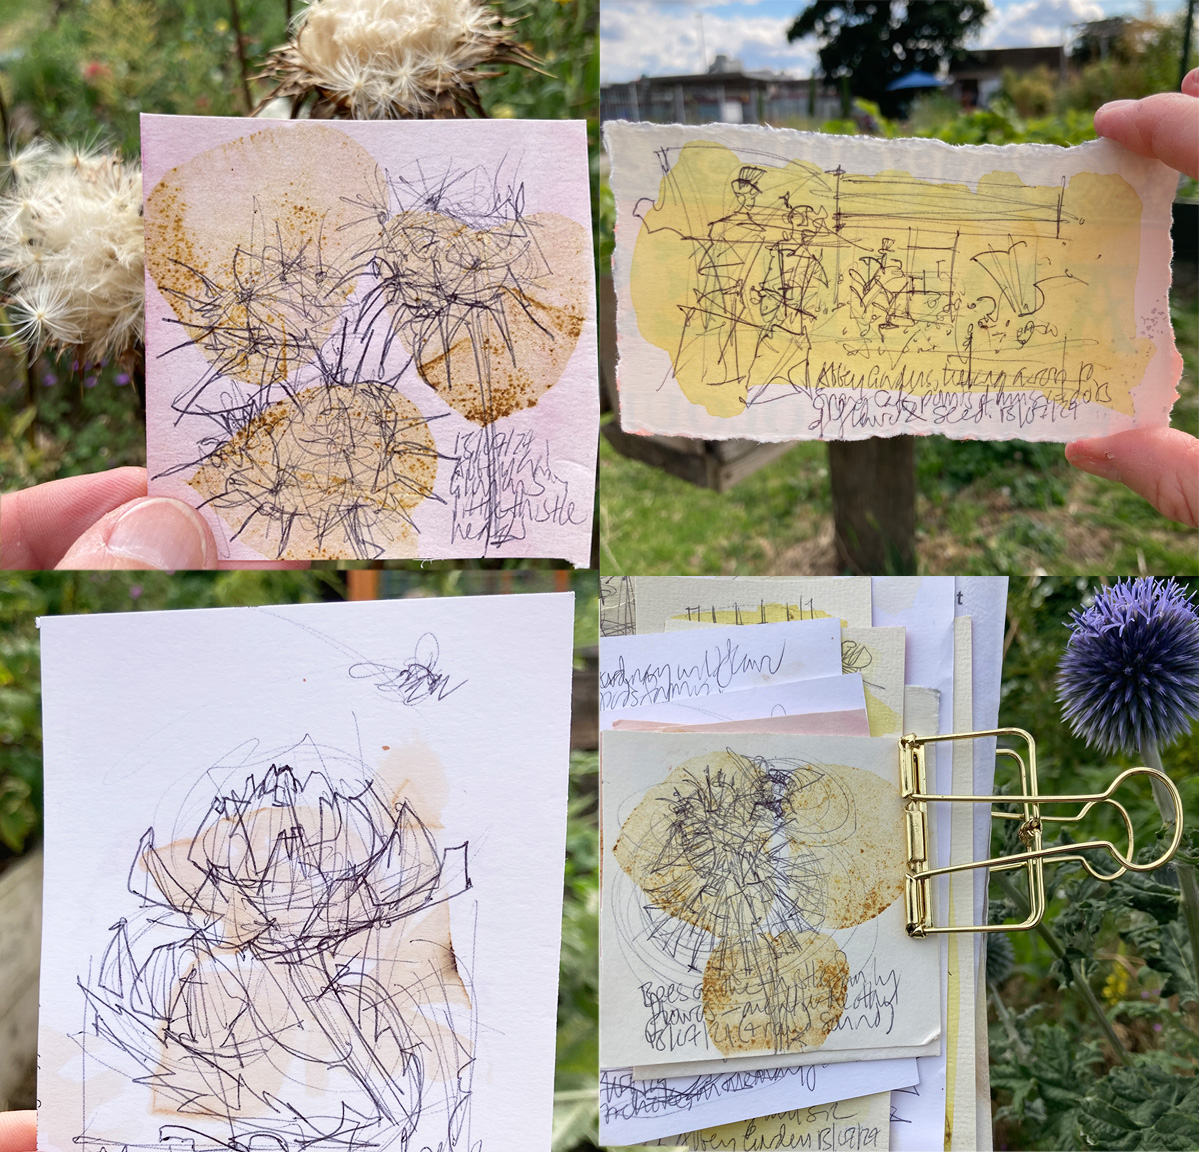 A selection of live sketches of people and plants at the Abbey Gardens Dialogues of Space event. The drawings are in line on reused paper with natural ink and eco-printed washes